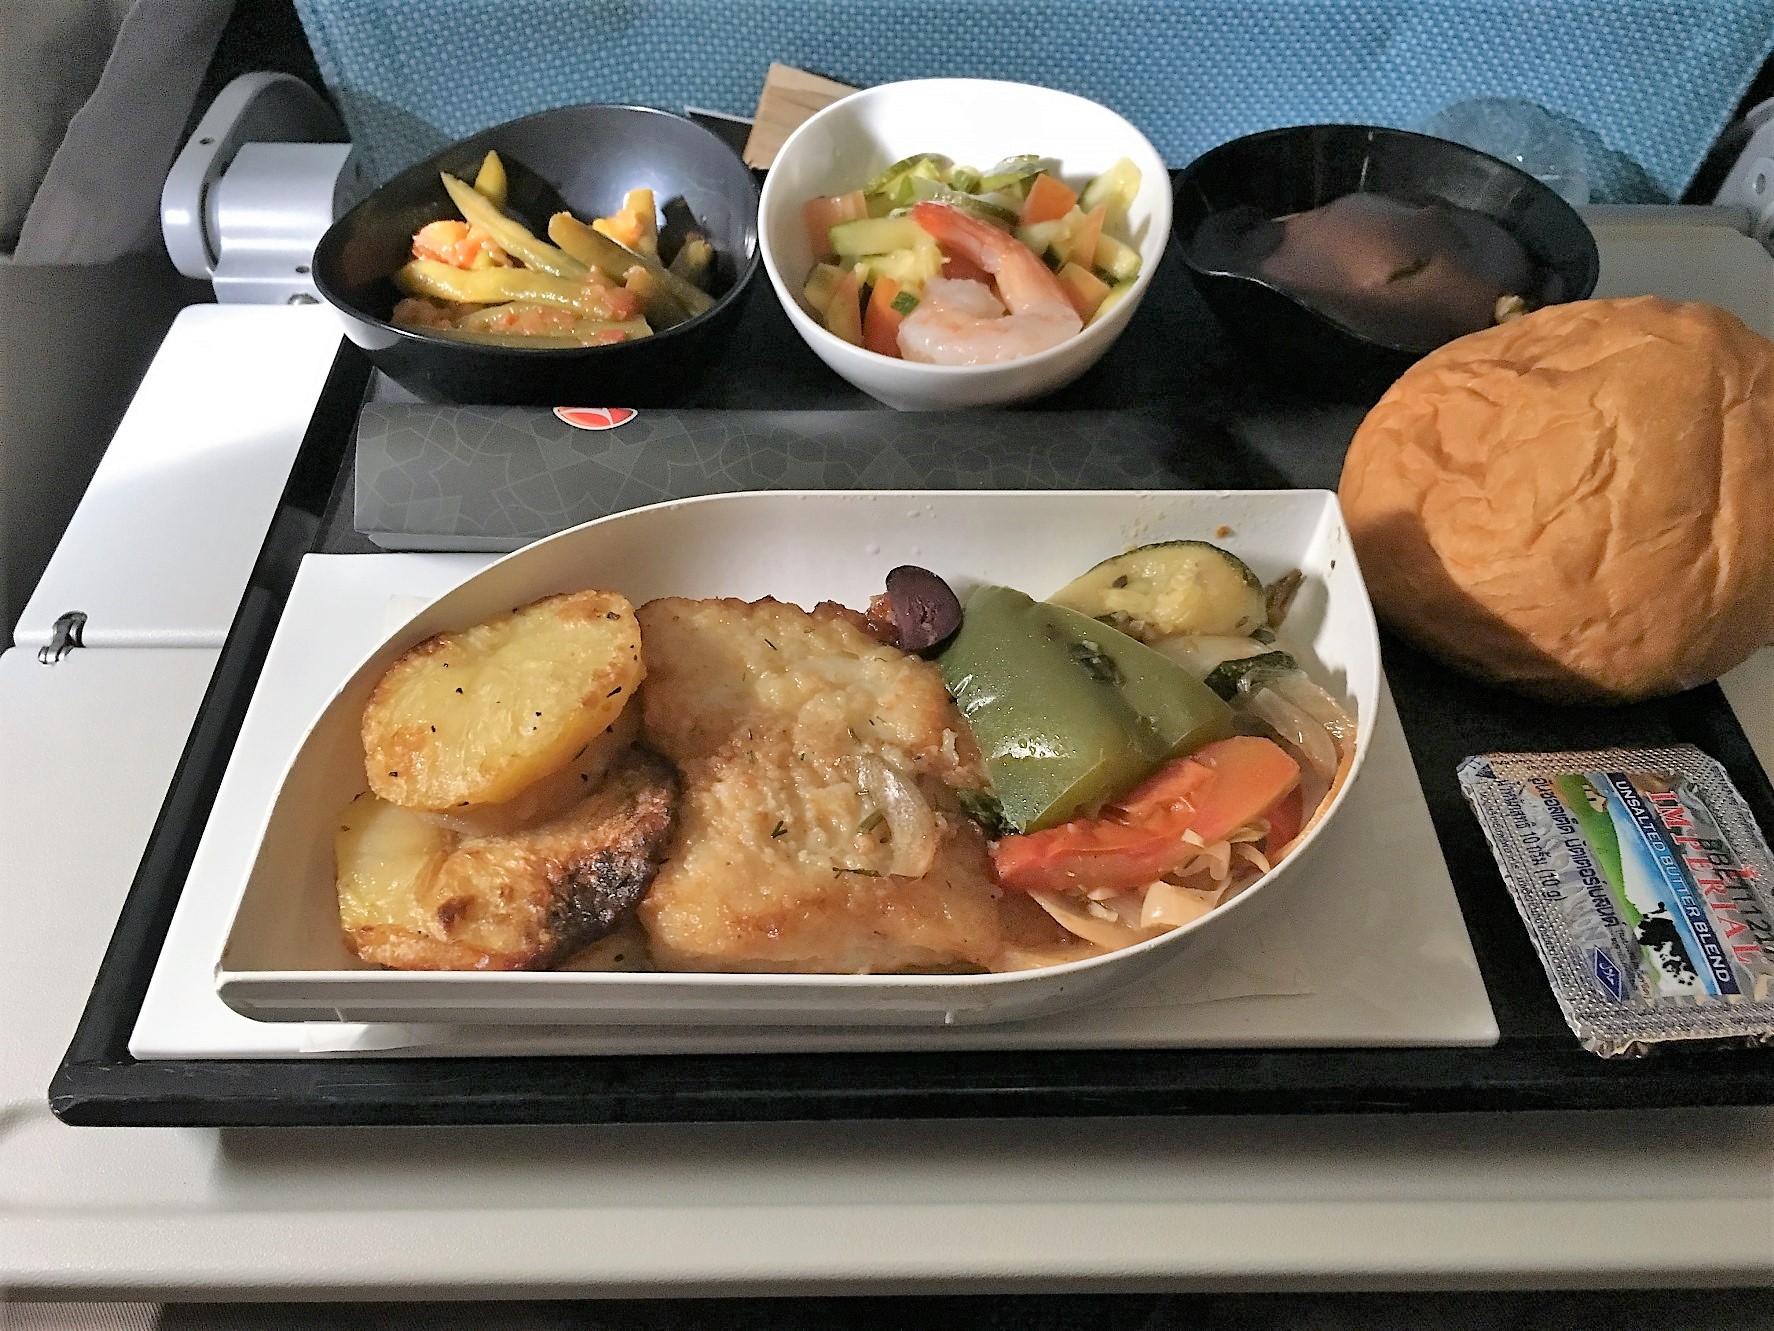 Turkish Airlines Inflight Meal (Istanbul-Phuket)